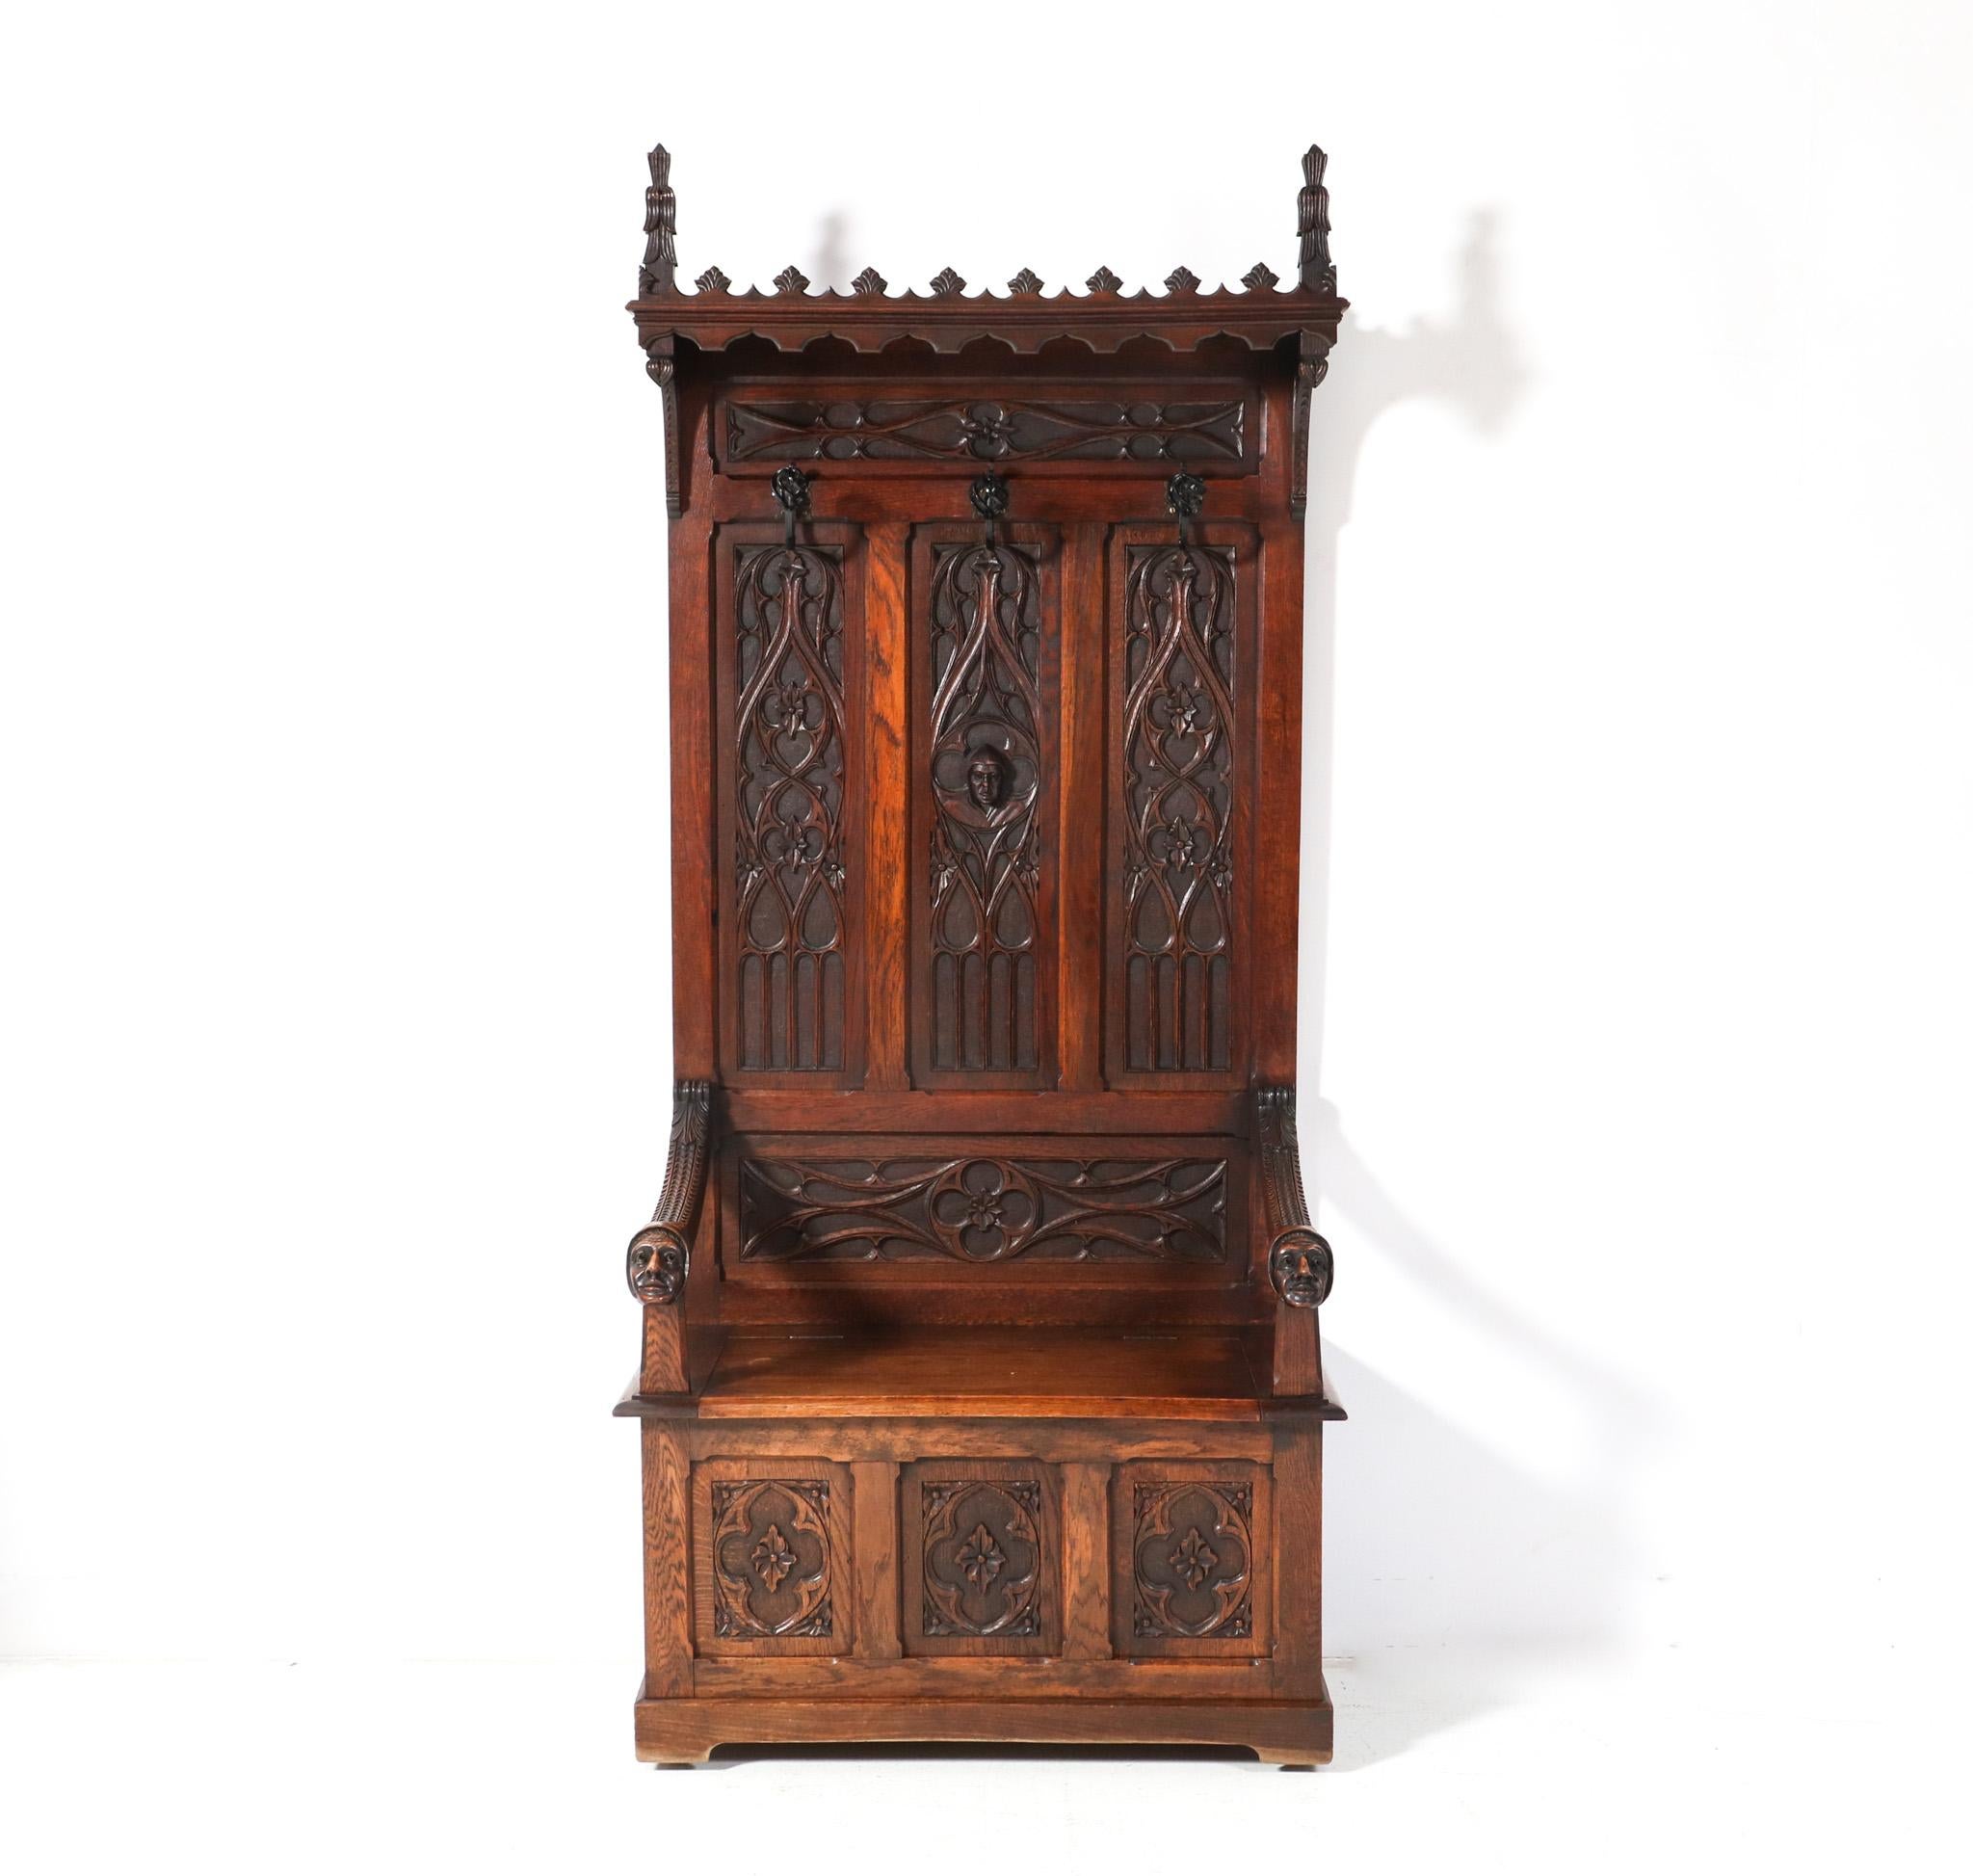 Magnificent and rare Gothic Revival hall bench.
Striking Dutch design from the 1900s.
Solid oak with original hand-carved decorative elements.
Original hand-carved decorative faces at the end of the armrests.
Underneath the seat, there is room for